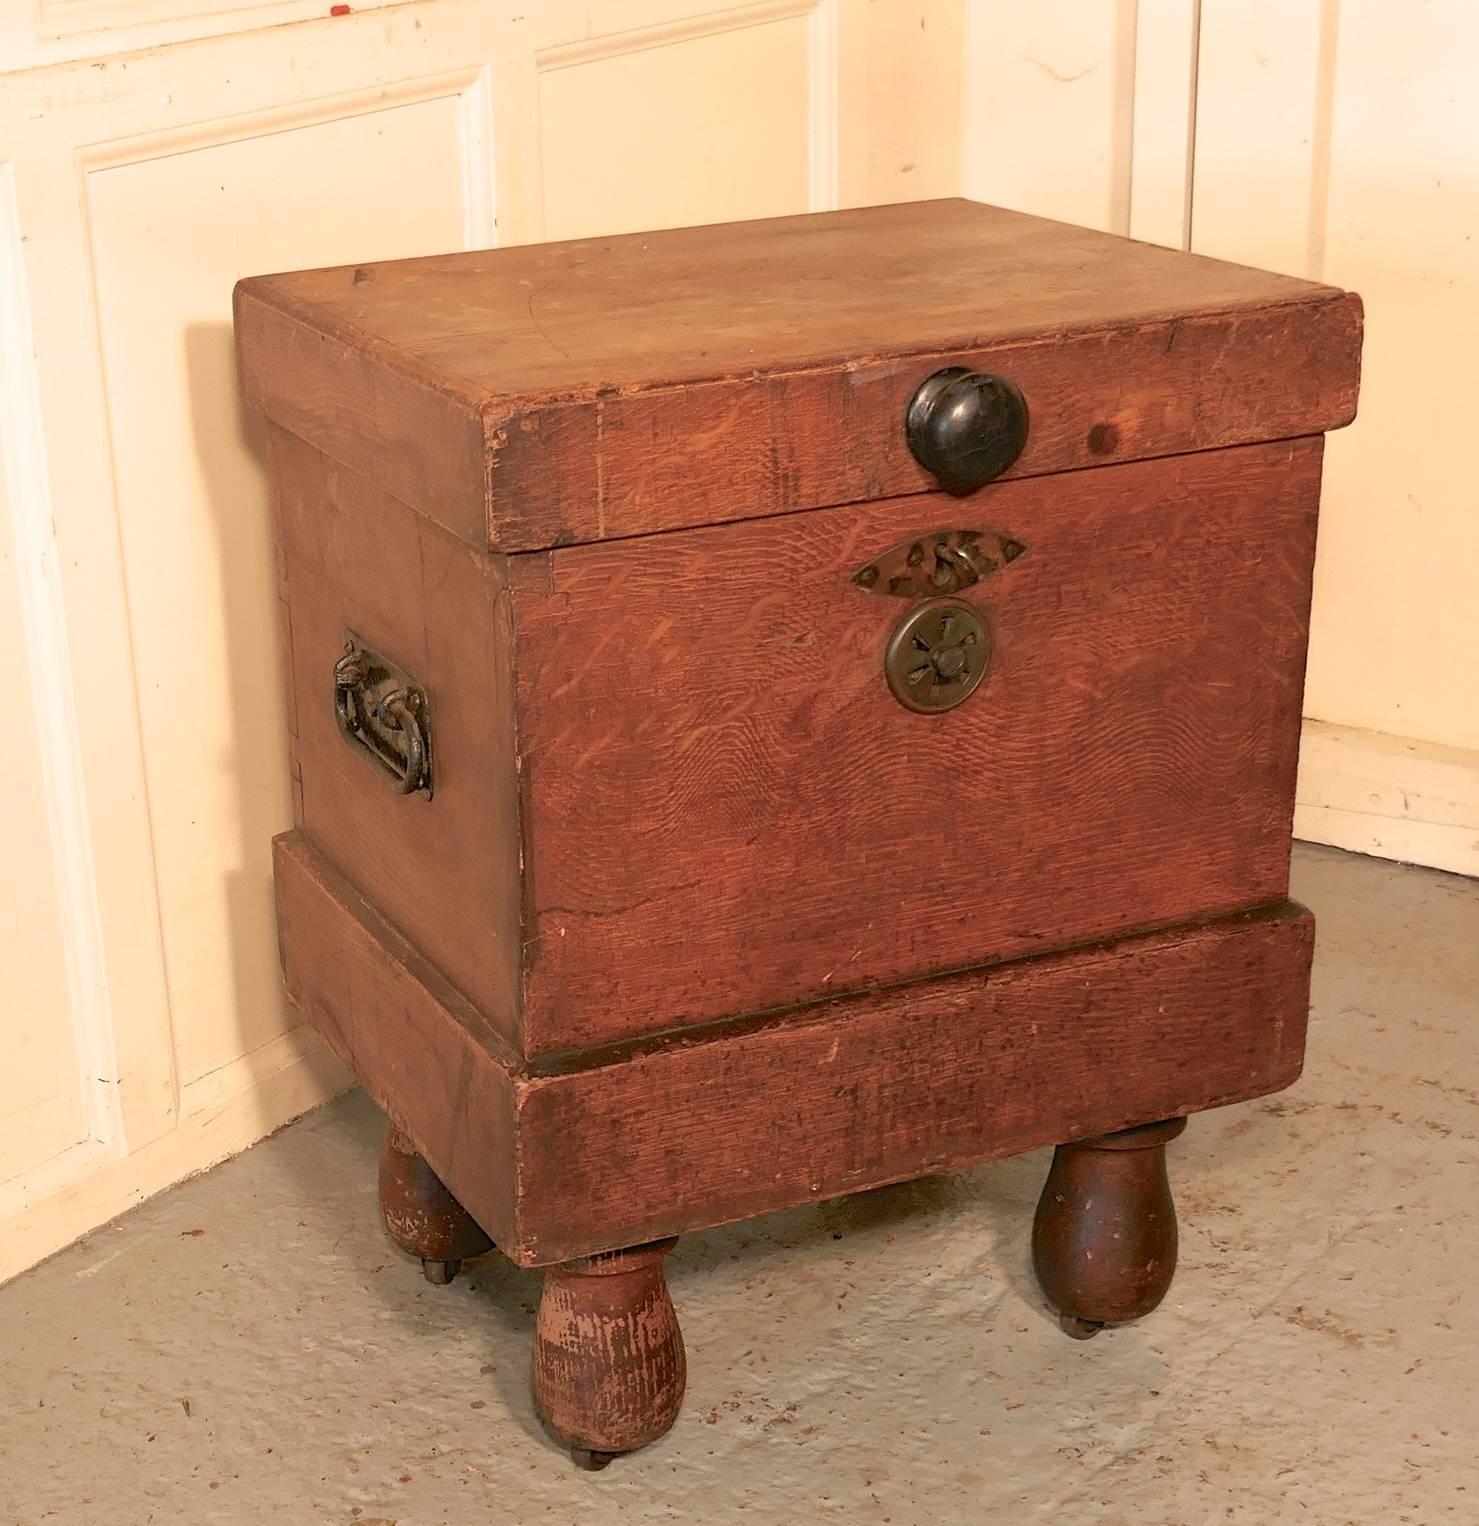 English Country House Pine Ice Box or Refrigerator from around 1890